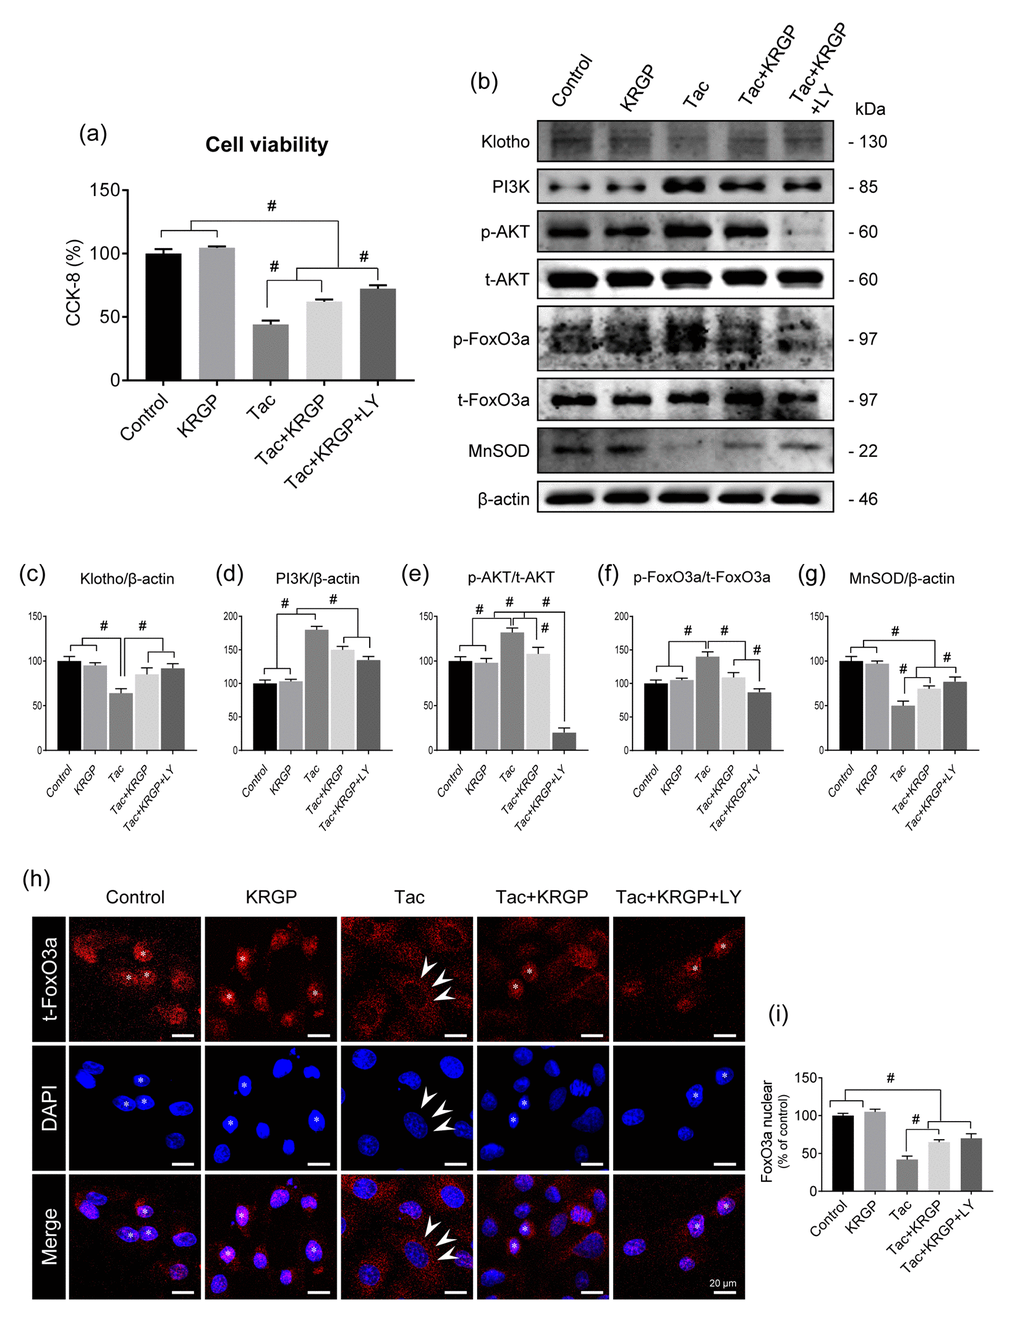 Effect of KRGP treatment on Klotho-induced MnSOD expression by regulating the PI3K/AKT/FoxO3a pathway in Tac-treated HK-2 cells. HK-2 cells were seeded in culture plates at 90% confluence. On the next day, the cells were treated with Tac (50 μg/mL) in the absence or presence of 10 μg/mL KRGP and 25 μM LY294002 (LY, PI3K inhibitor) for 12 h. Before the end of the treatment, CCK-8 solution was added to each well for 2 h to measure cell viability. (A) Cell-viability assay results of the experimental group. (B) Whole-cell lysates were collected after each 12-h drug treatment to measure the protein expression of PI3K, phosphorylated AKT (p-AKT), phosphorylated FoxO3a (p-FoxO3a), and MnSOD. All proteins were normalized to β-actin or total (t) protein controls. (C–G) Quantitative graph for immunoblot analysis in each group. (H) After each 12-h drug treatment, the cells were fixed with fixative and then immunofluorescence was performed with an antibody against t-FoxO3a. Nuclear translocation of t-FoxO3a was observed by confocal microscopy. (I) Quantitative graph for nuclear FoxO3a expression in each group. Scale bar = 20 μm. Data are presented as mean ± SE and are representative of at least three independent experiments. #P 